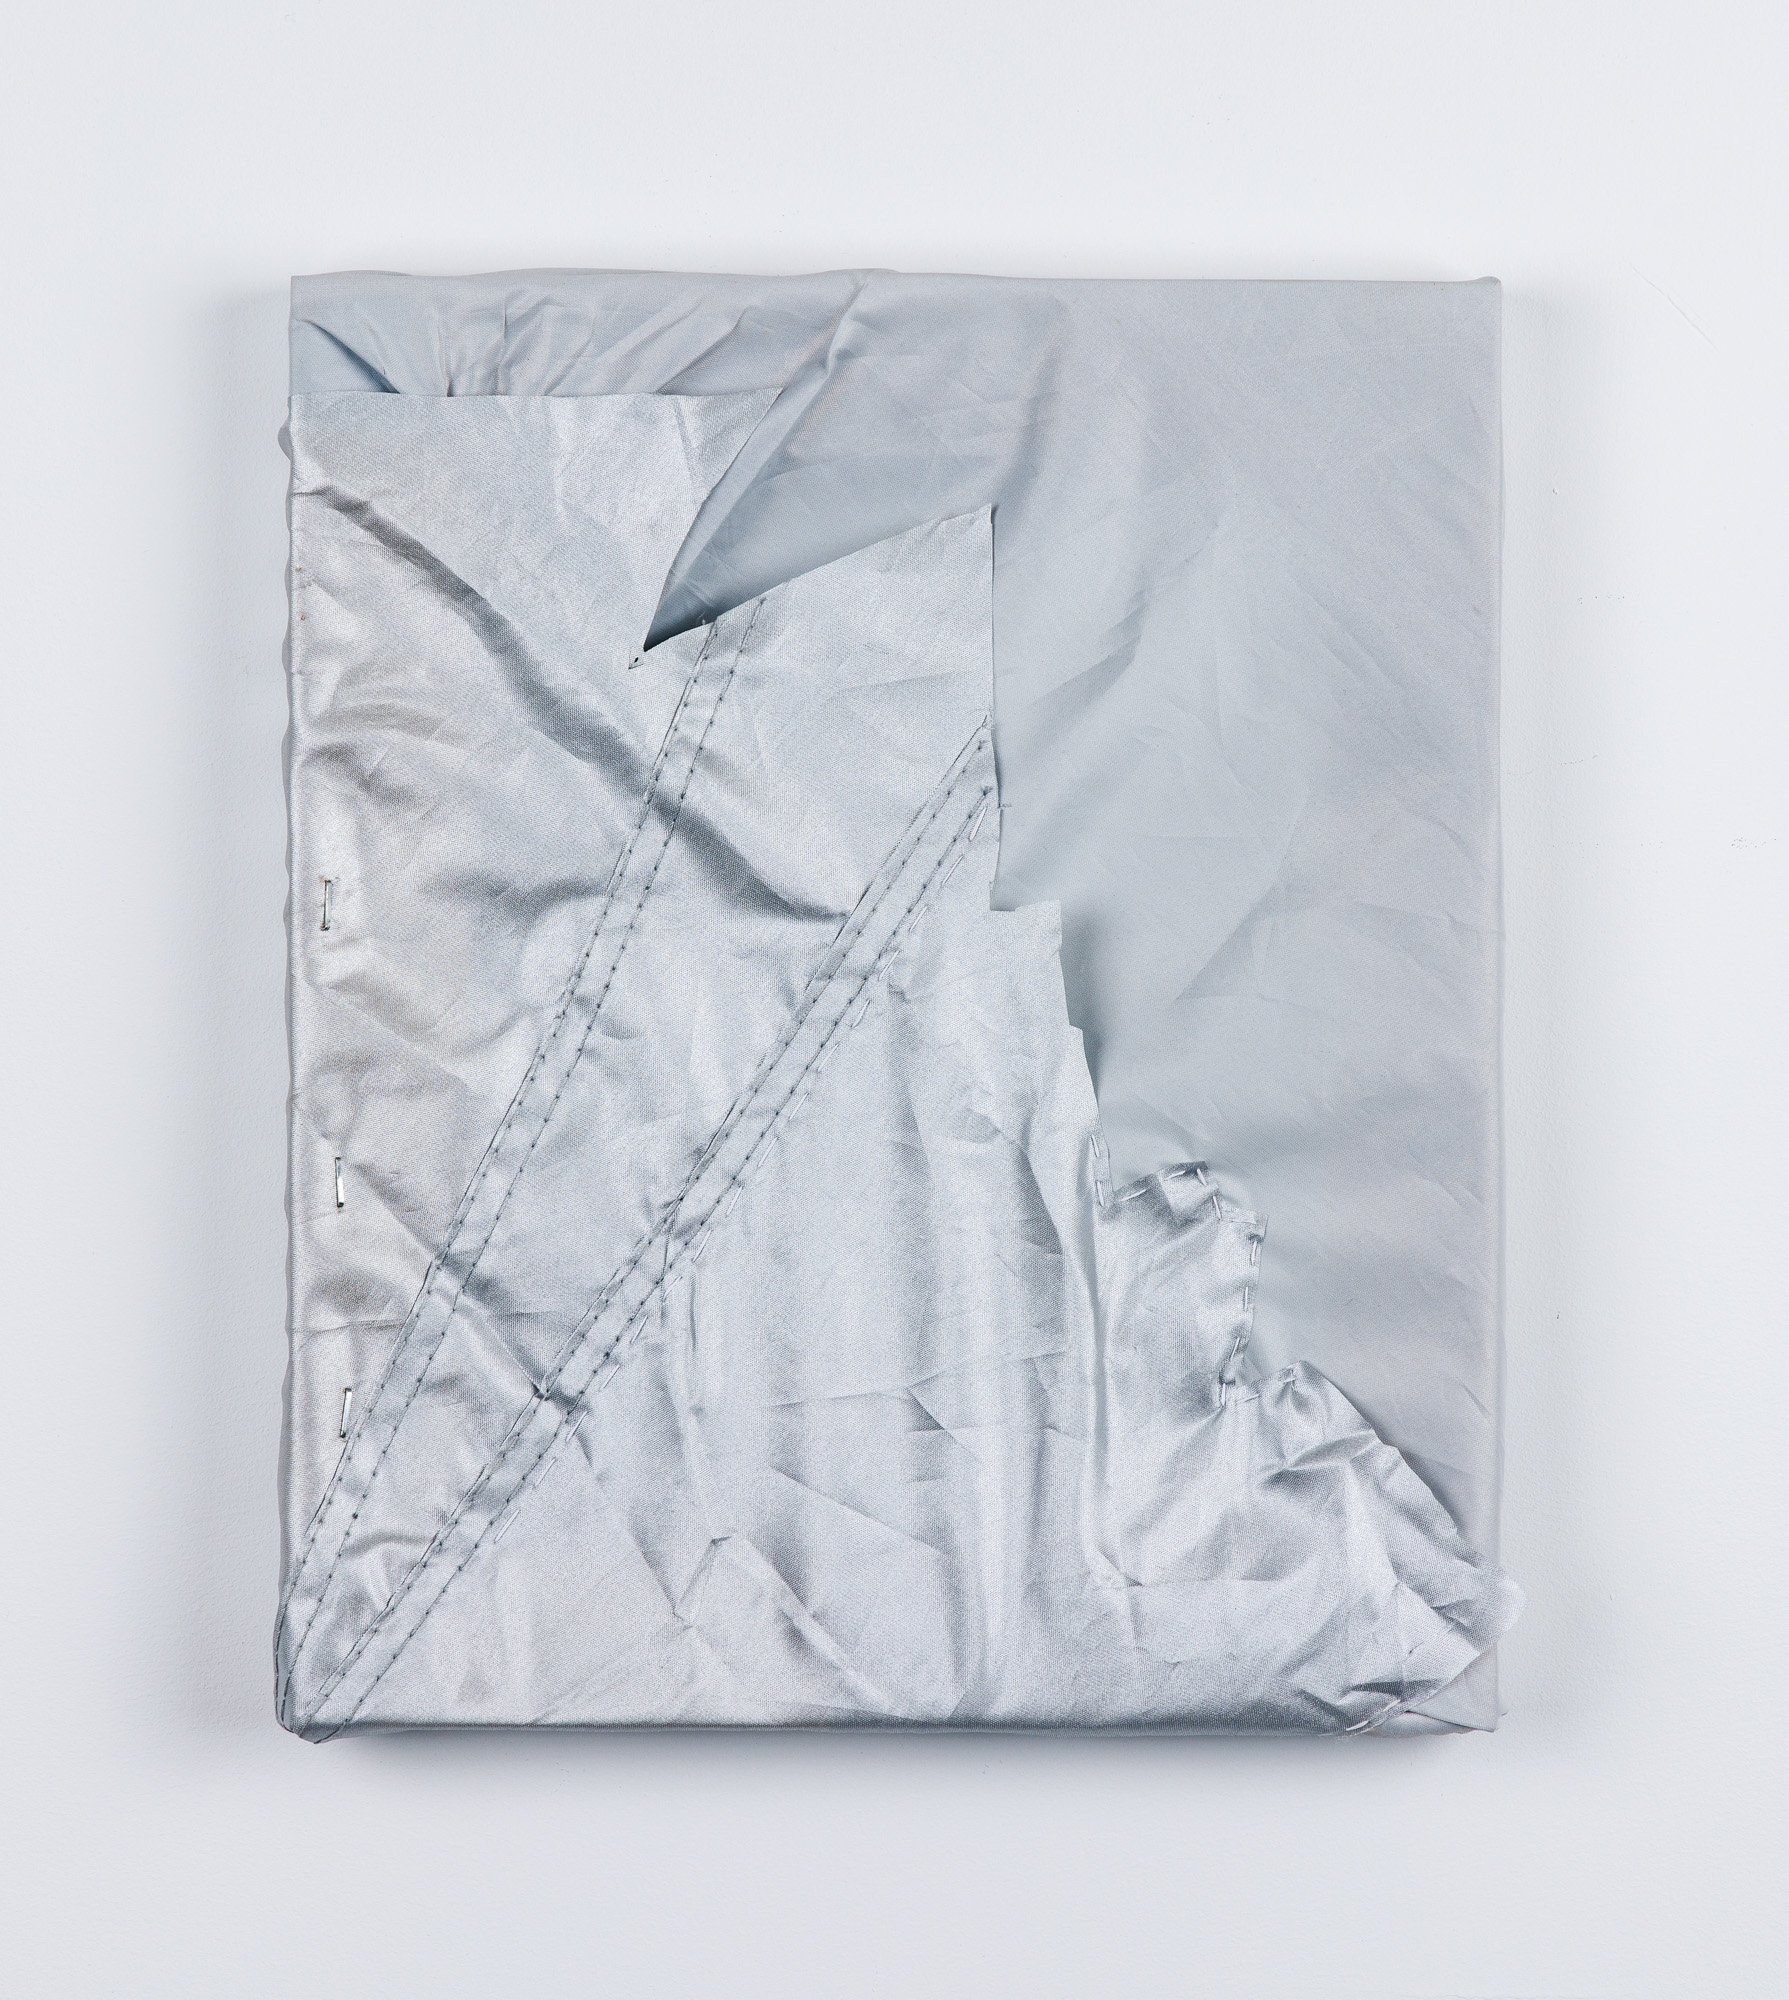  Laura Hunt,  Untitled (jagged) , 2019, nylon motorcycle cover and hand-sewing, 12 x 10 inches. 